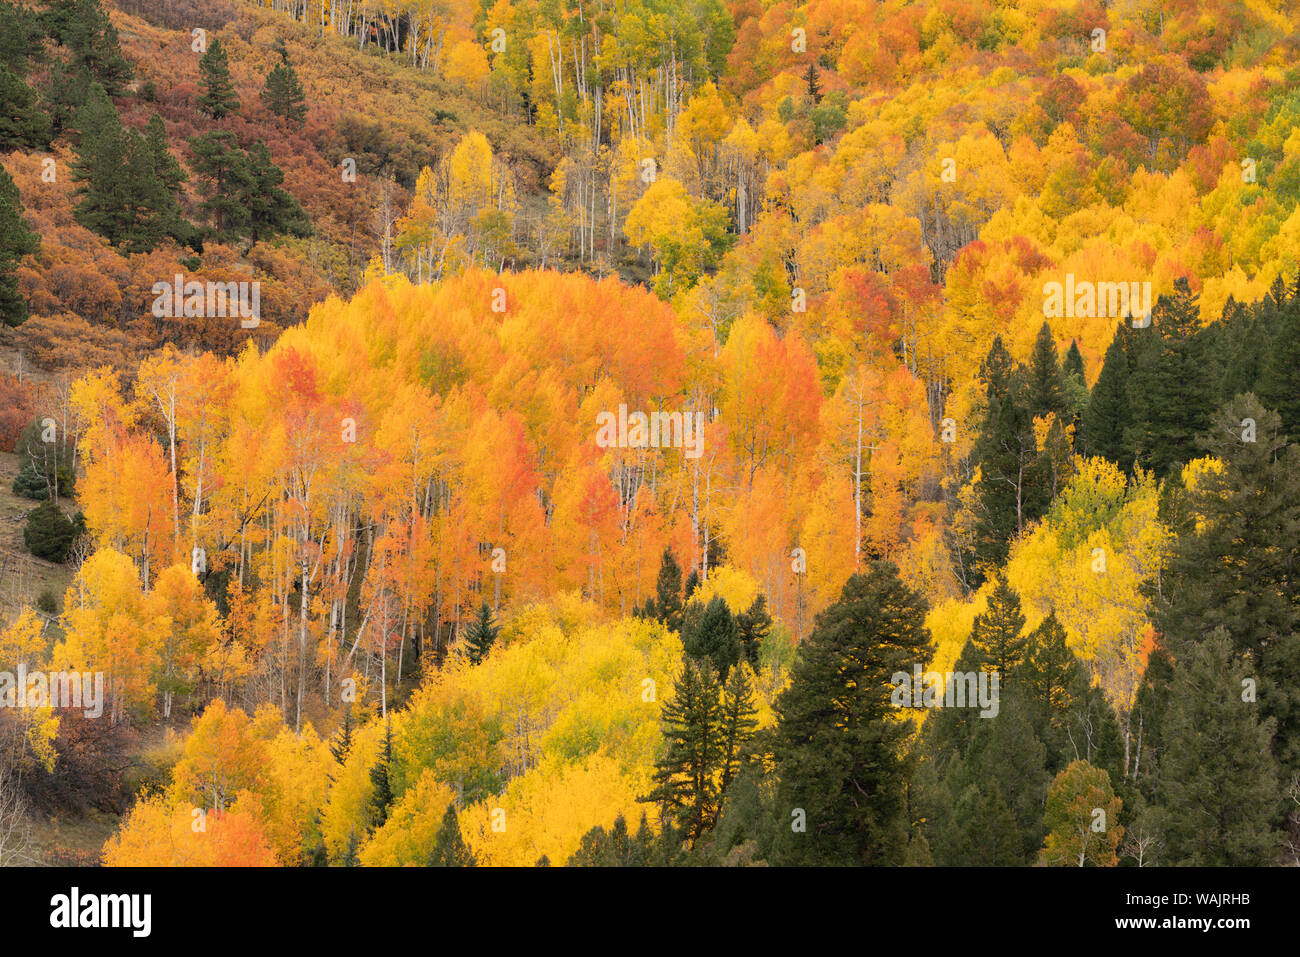 USA, Colorado, Uncompahgre National Forest. Mountain aspen forest in autumn. Credit as: Don Grall / Jaynes Gallery / DanitaDelimont.com Stock Photo